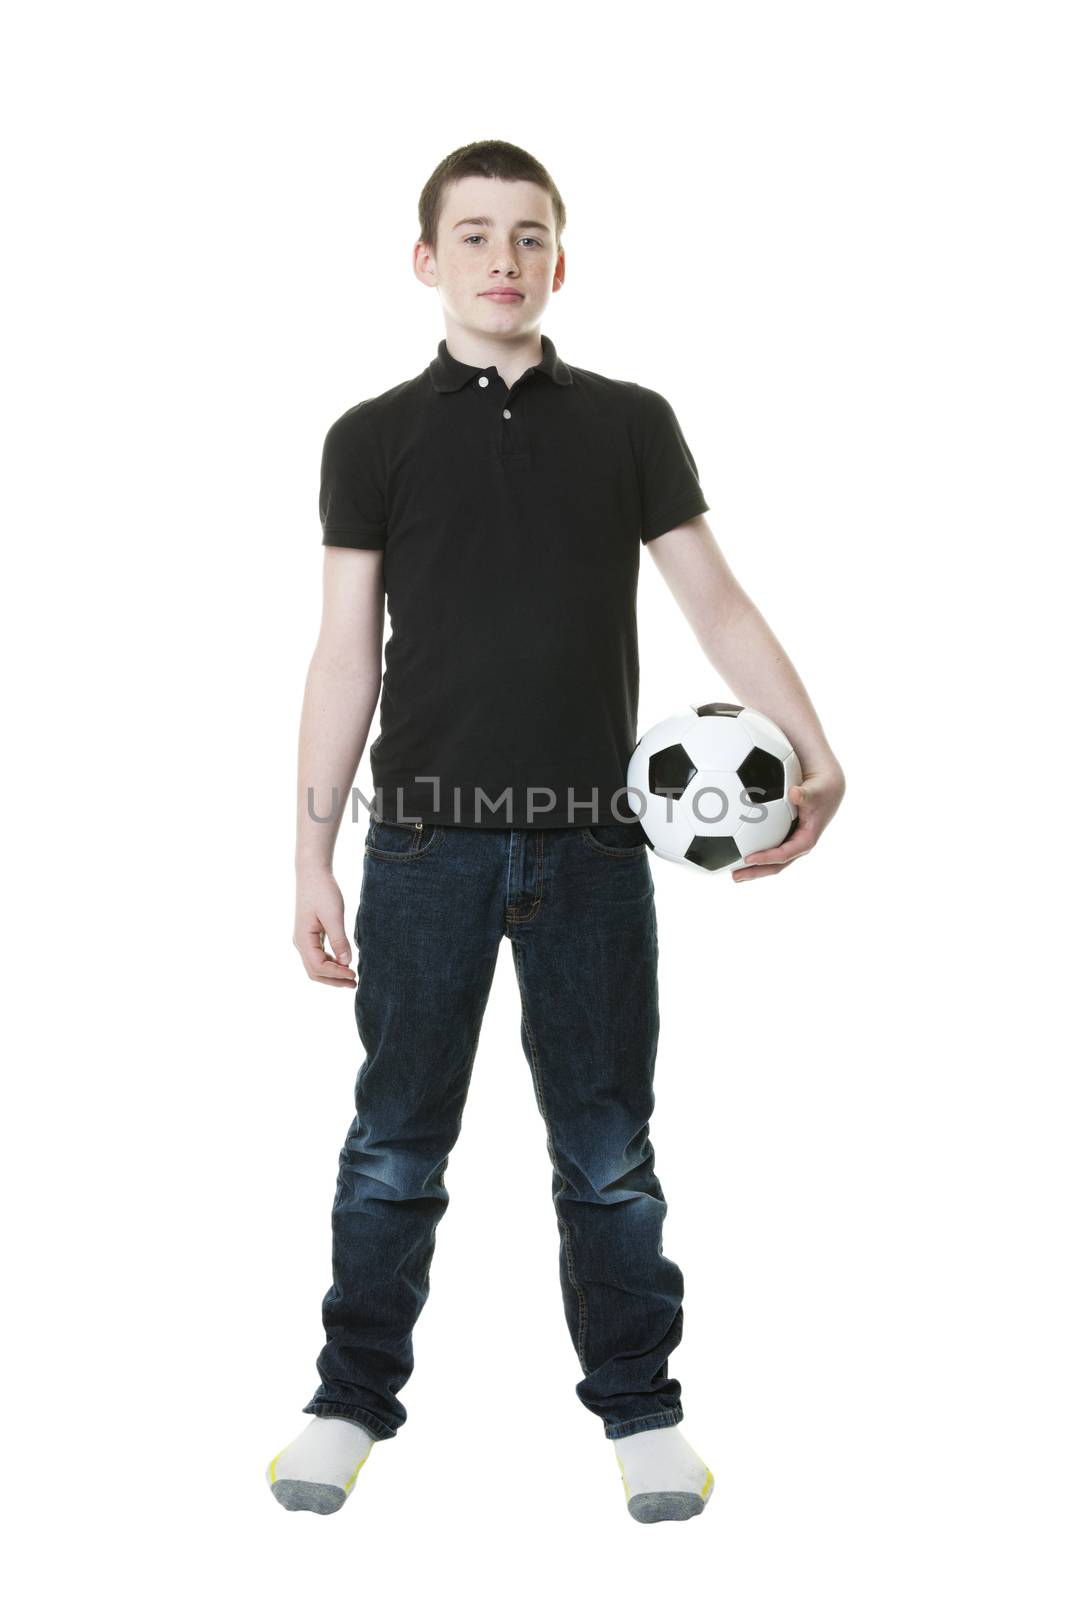 A thirteen year old boy dressed in jeans and t-shirt and holding a soccer ball.  Shot on white background.